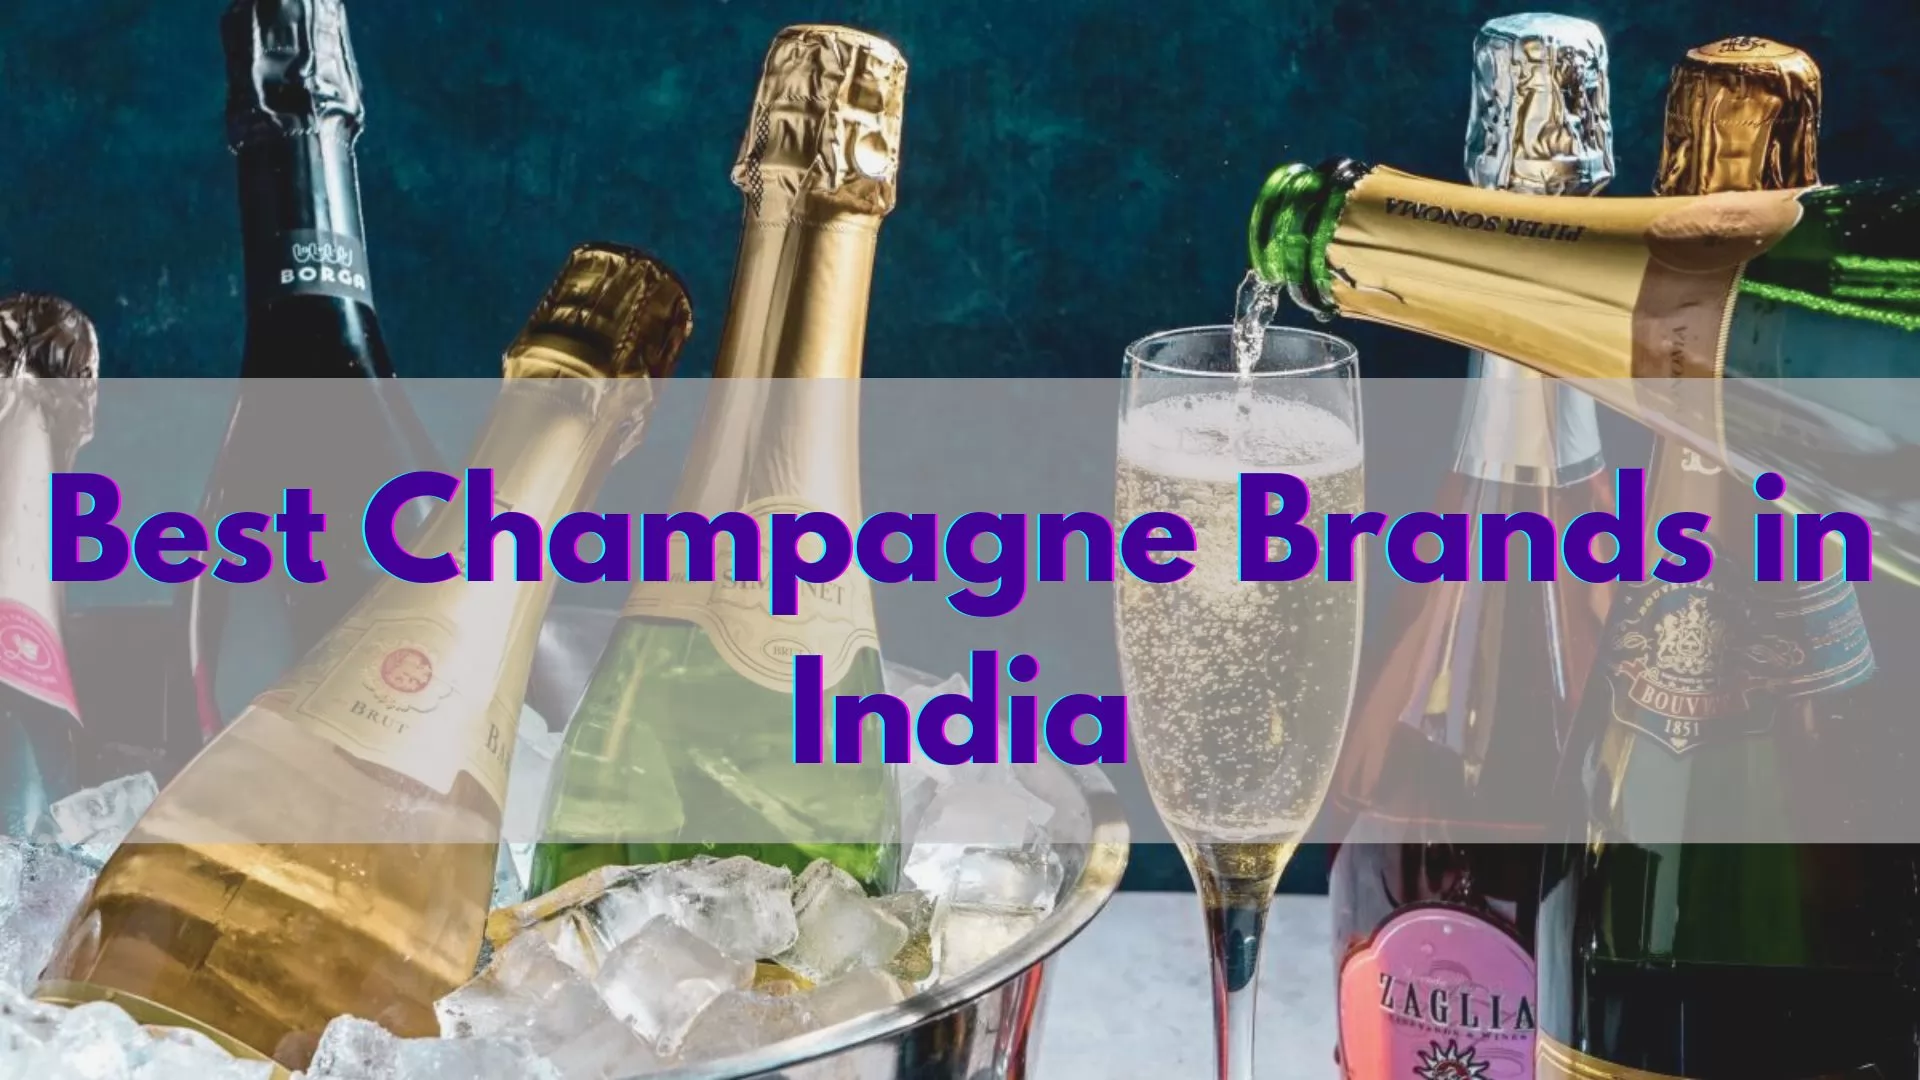 The 15 Best Champagnes to Drink in 2023